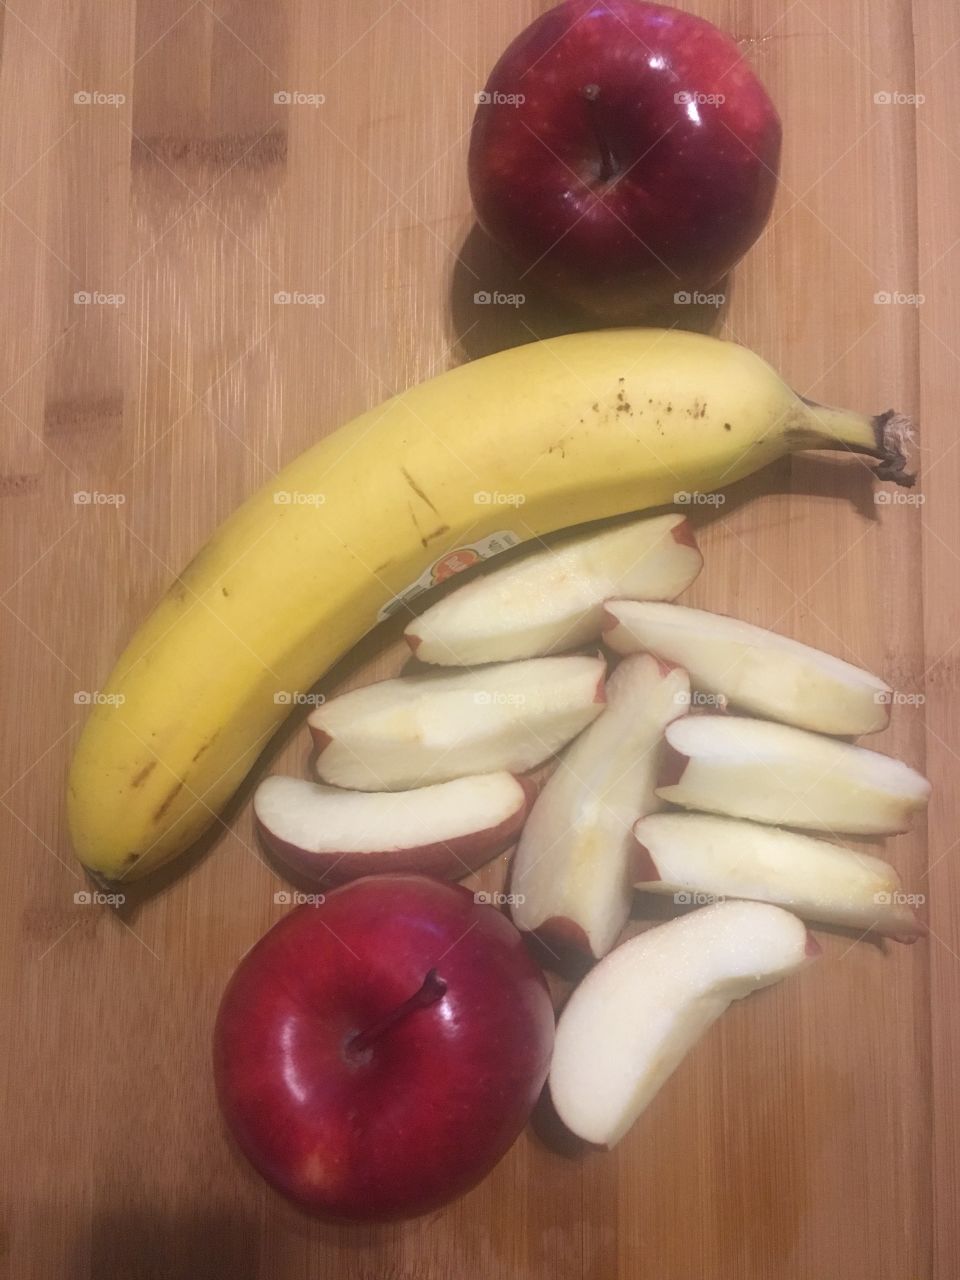 I want to eat apples and bananas 